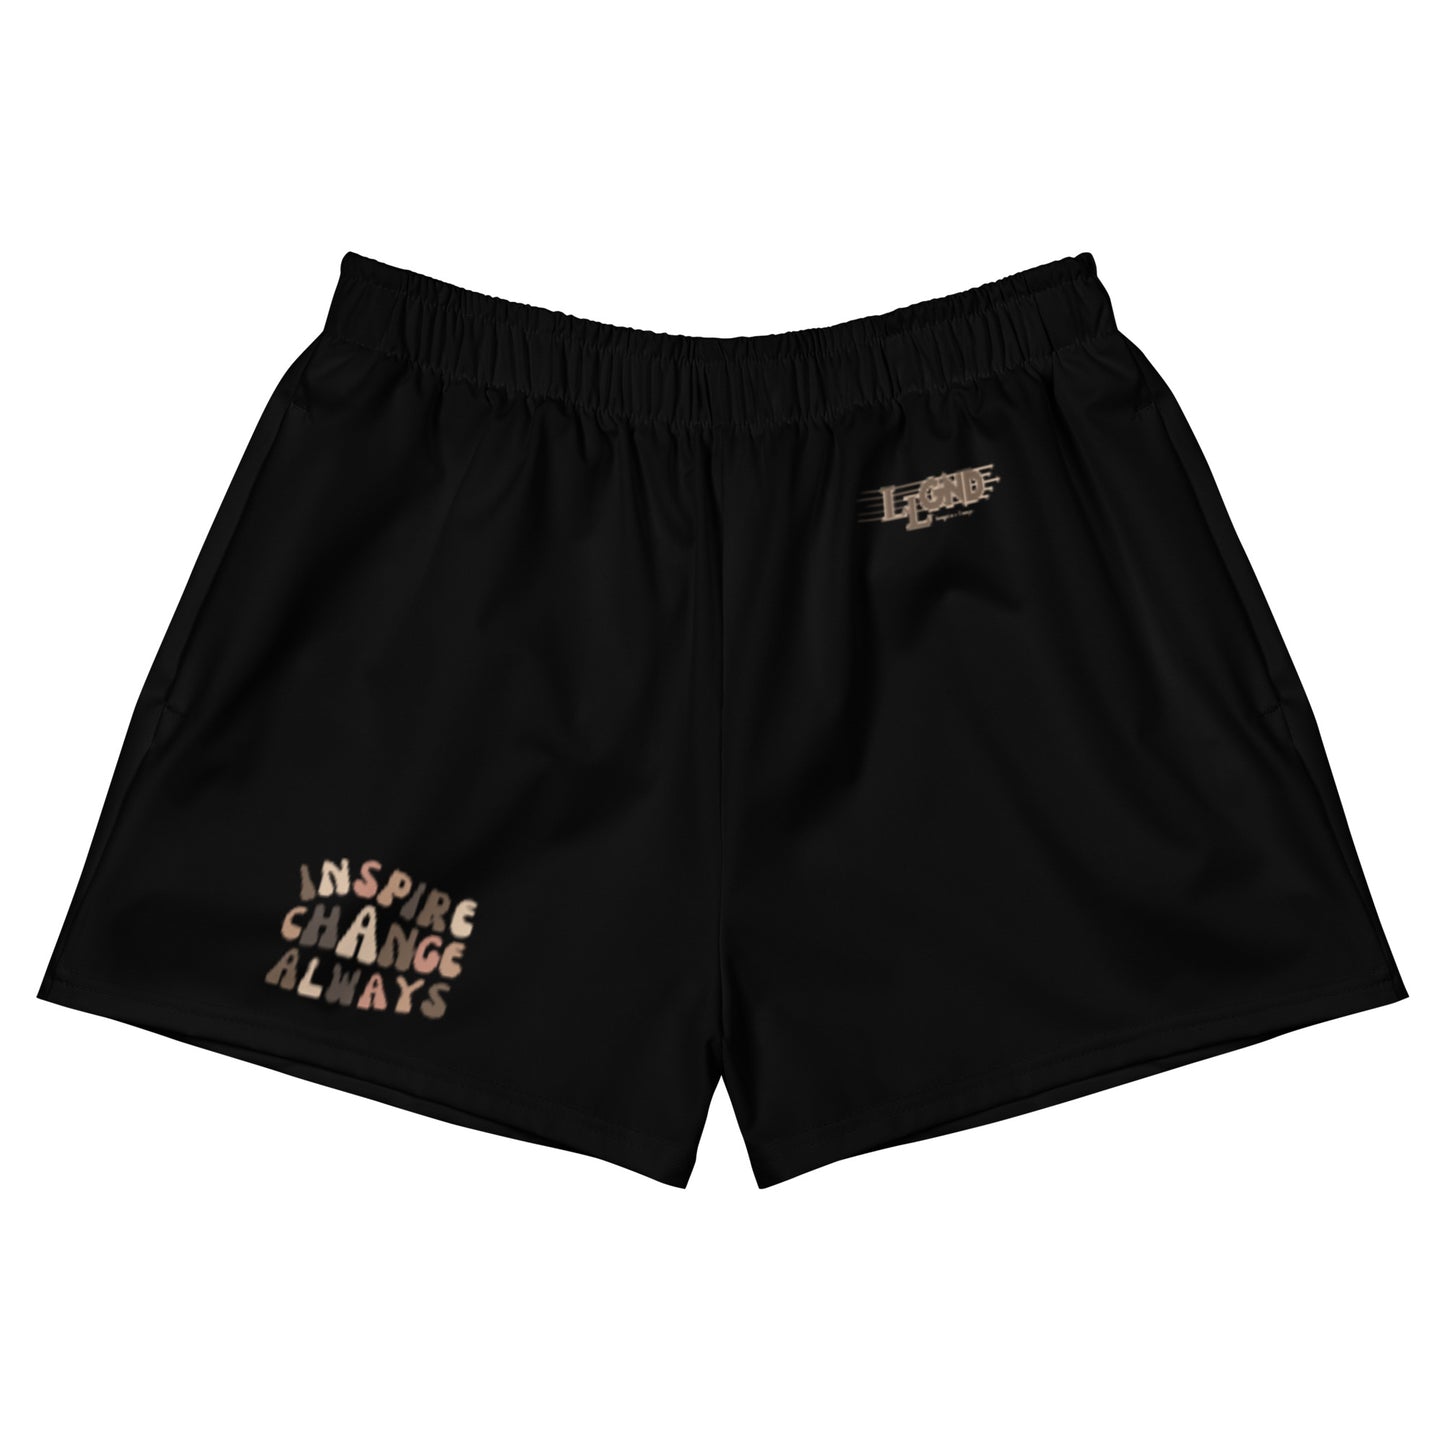 WOMEN'S INSPIRE RECYCLED SHORTS (BLACK)